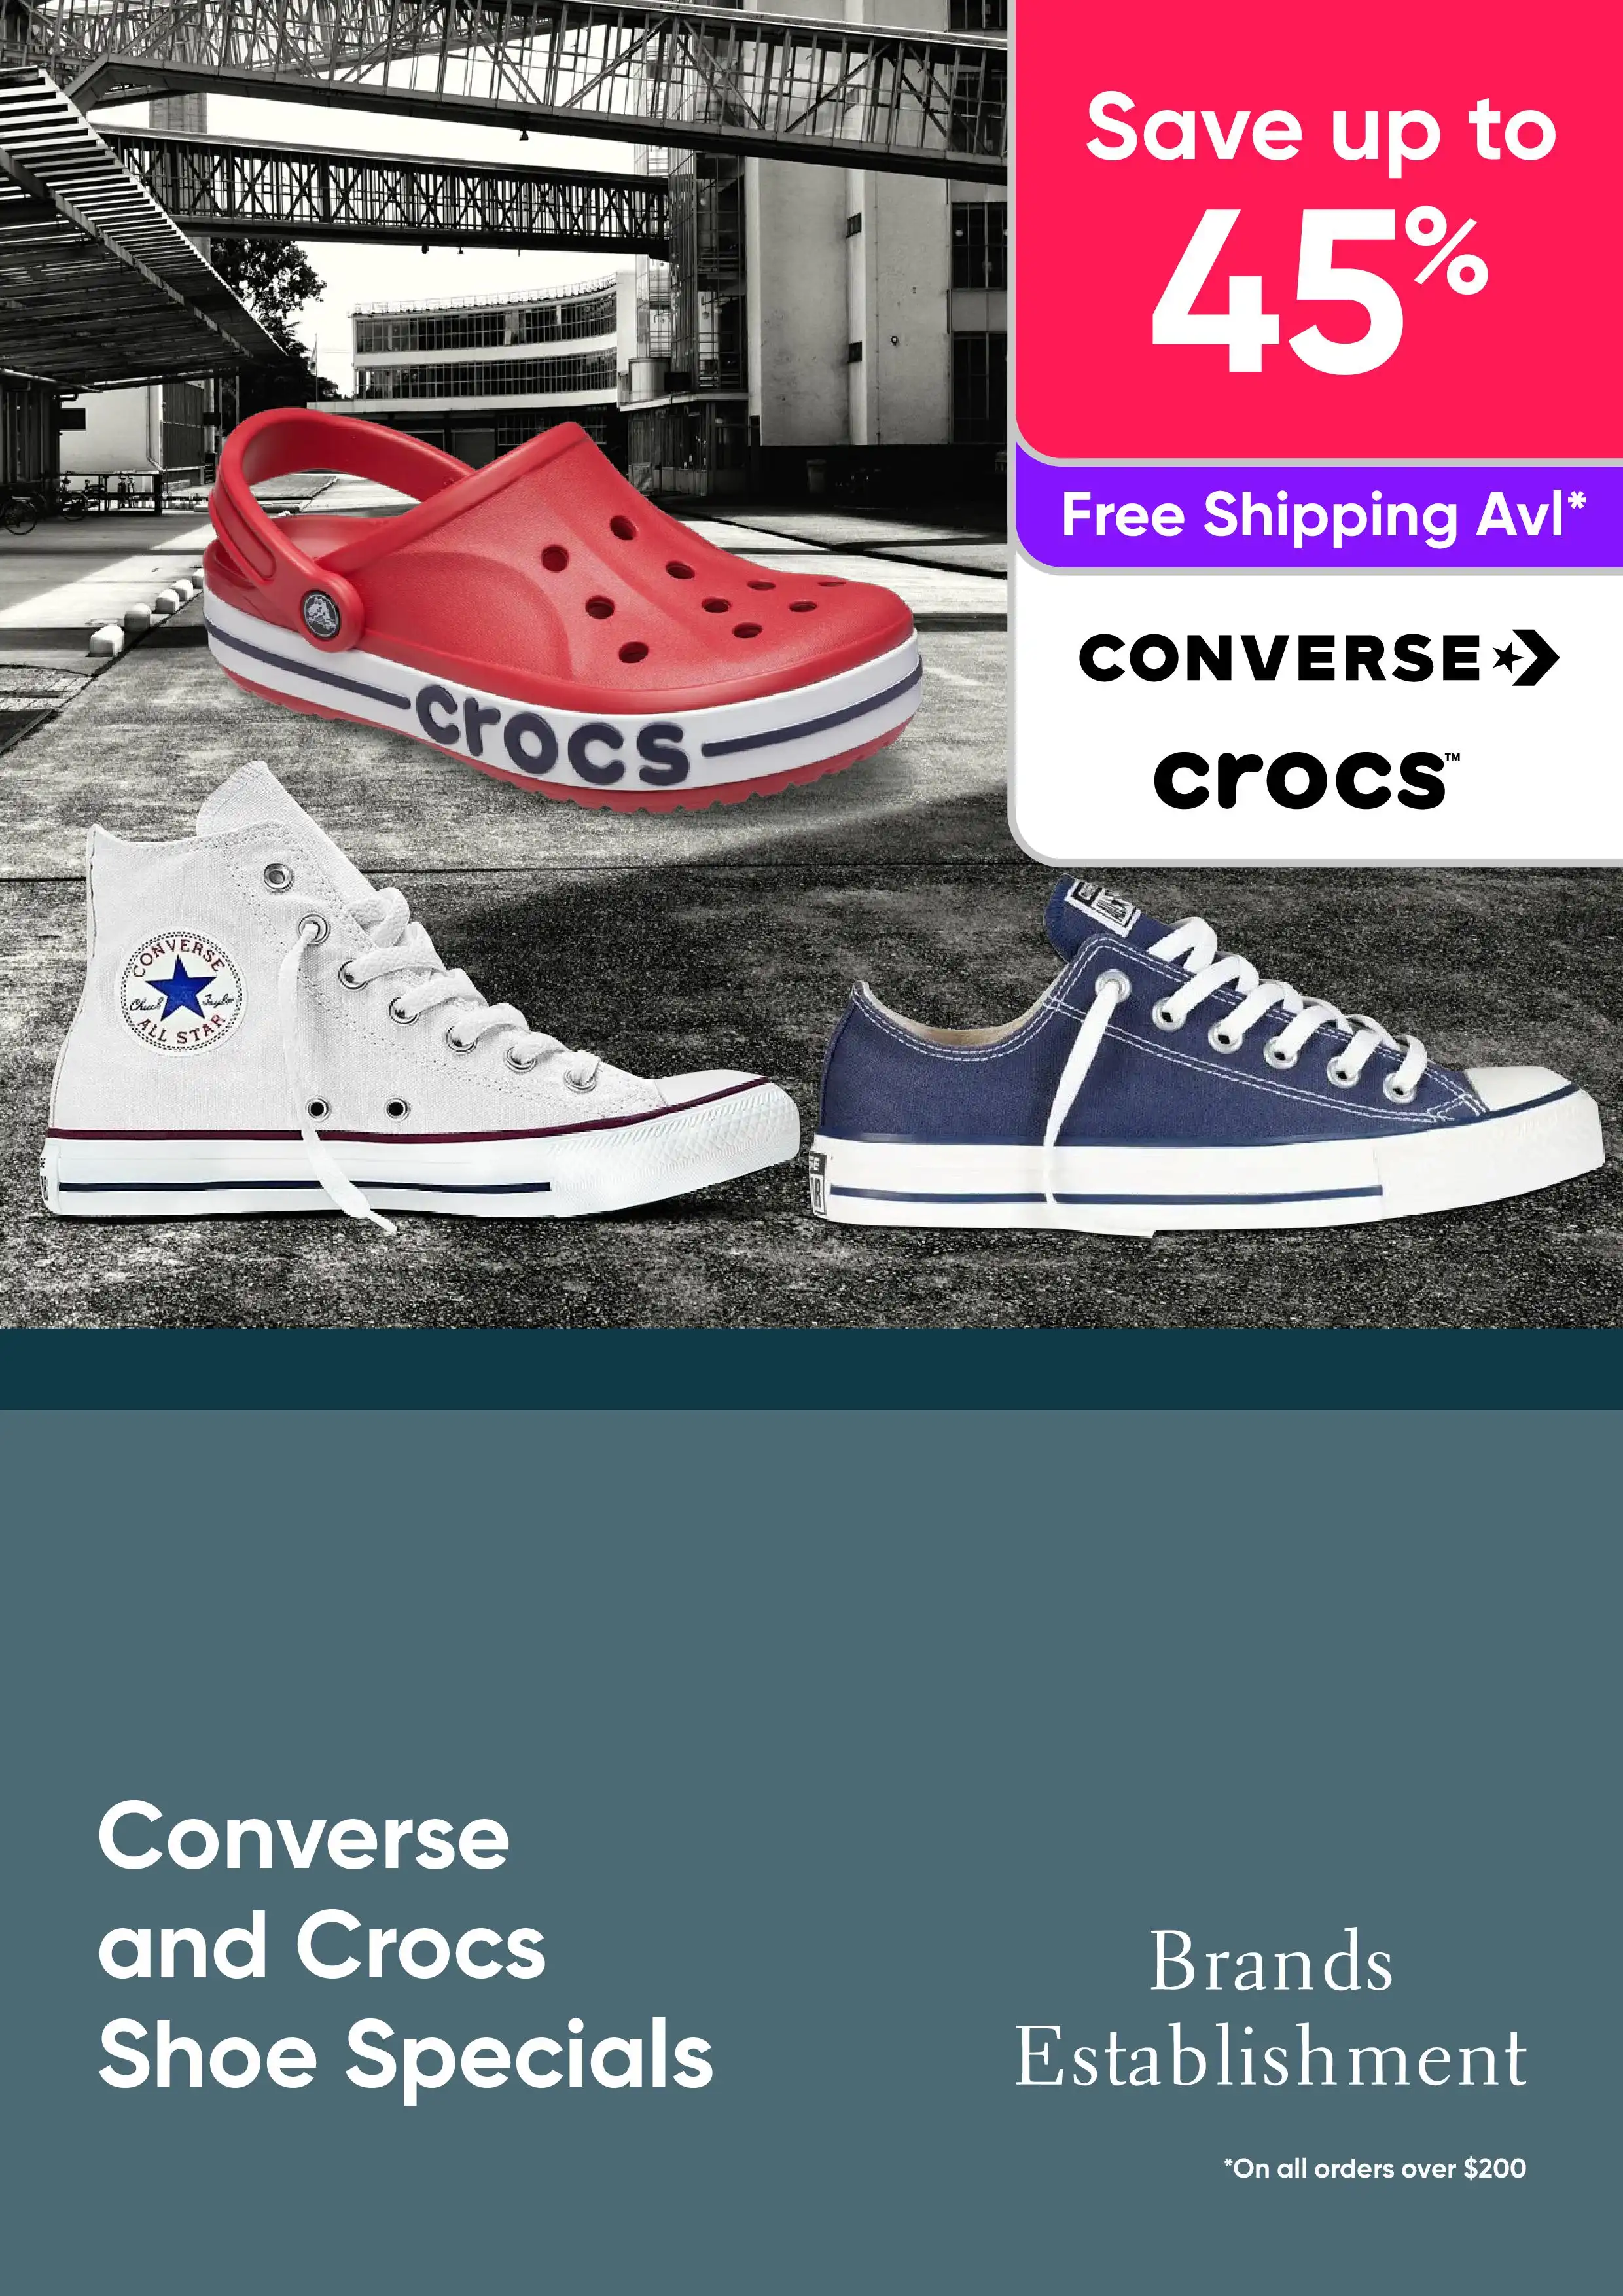 From $59 for Converse Chuck Taylor Shoes and $30 For all Crocs Kids Shoes